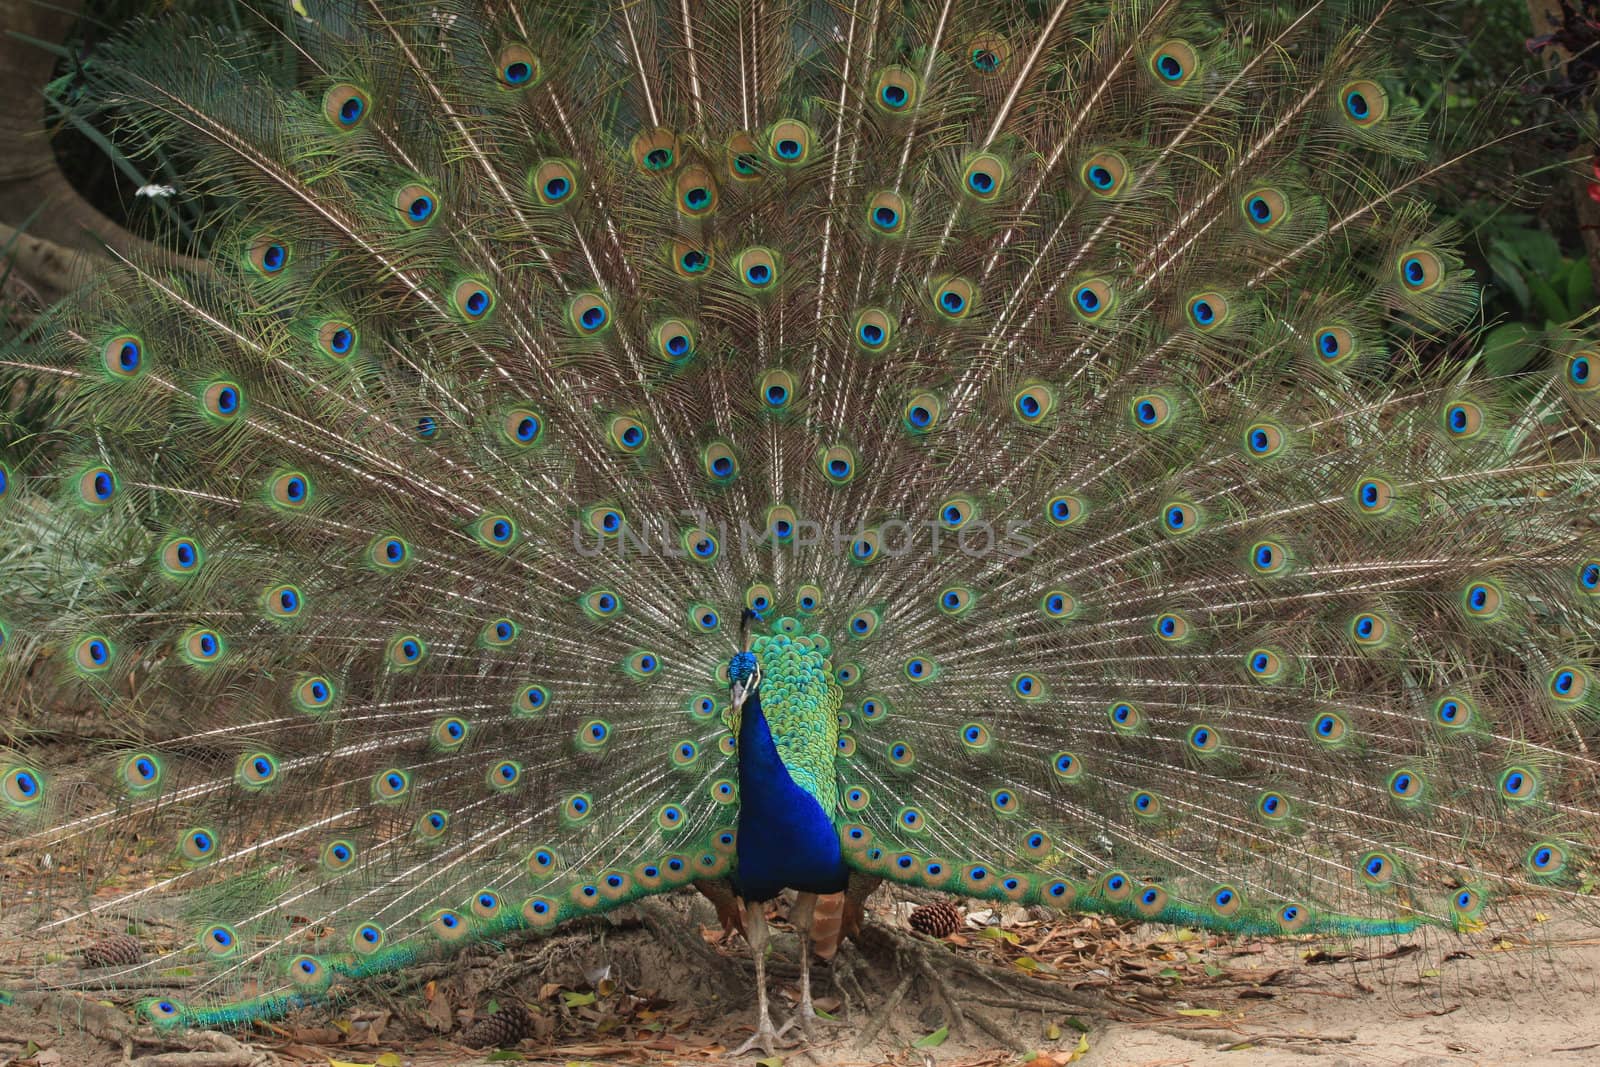 Male peacock courting a female